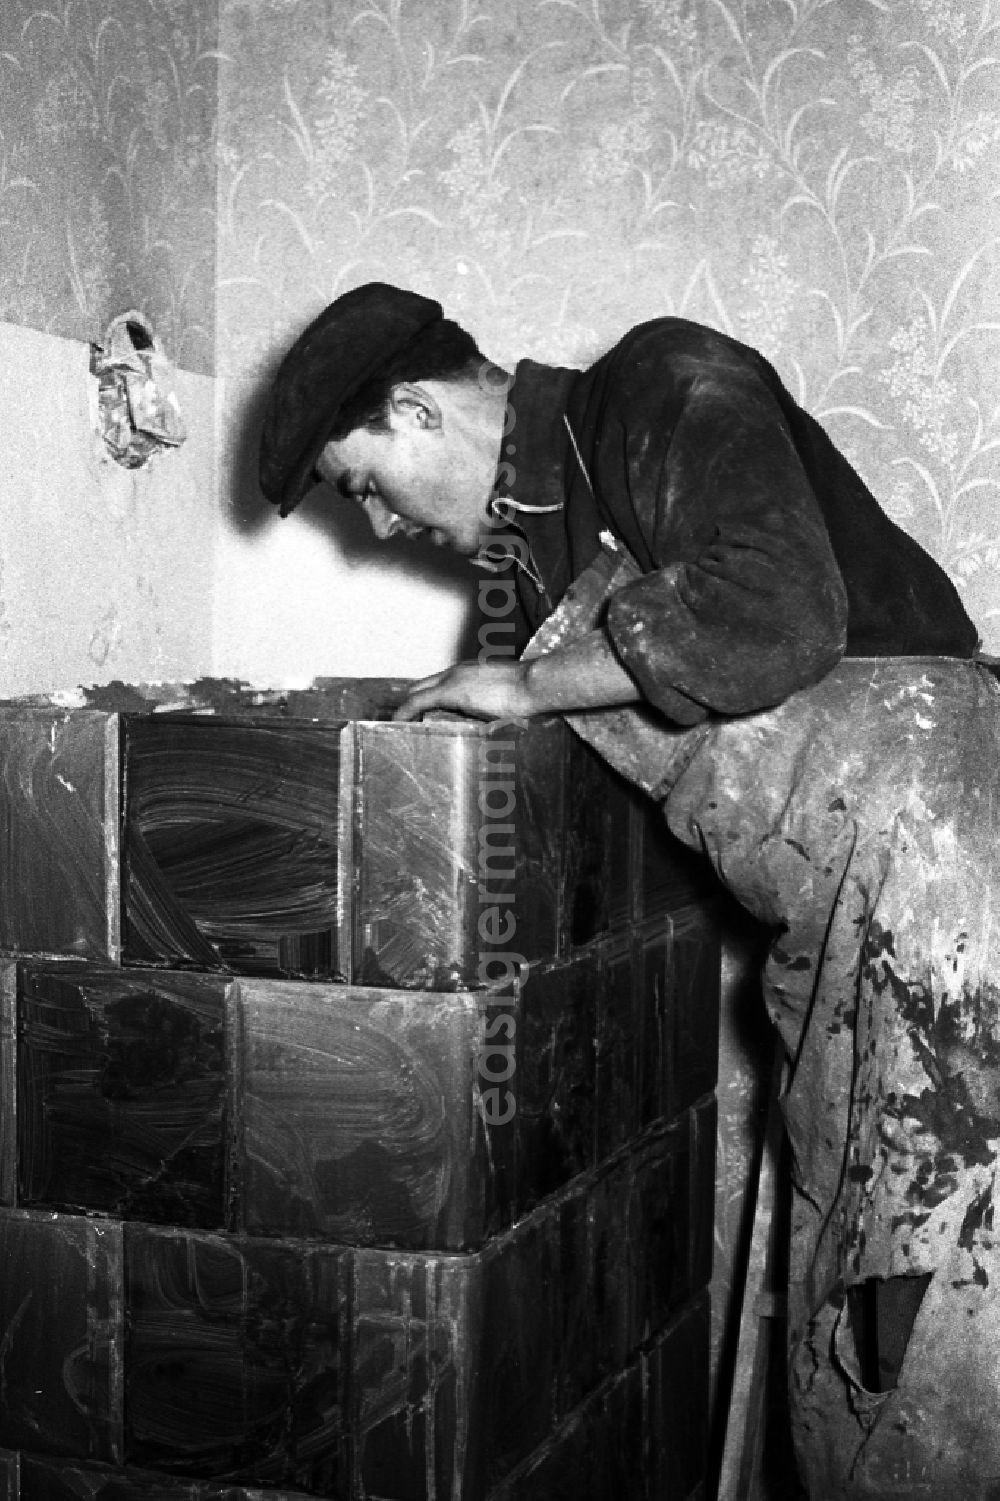 GDR image archive: Zschopau - A stove farmer stove fitter puts a tiled stove in a flat in Zschopau in the federal state Saxony in the area of the former GDR, German democratic republic